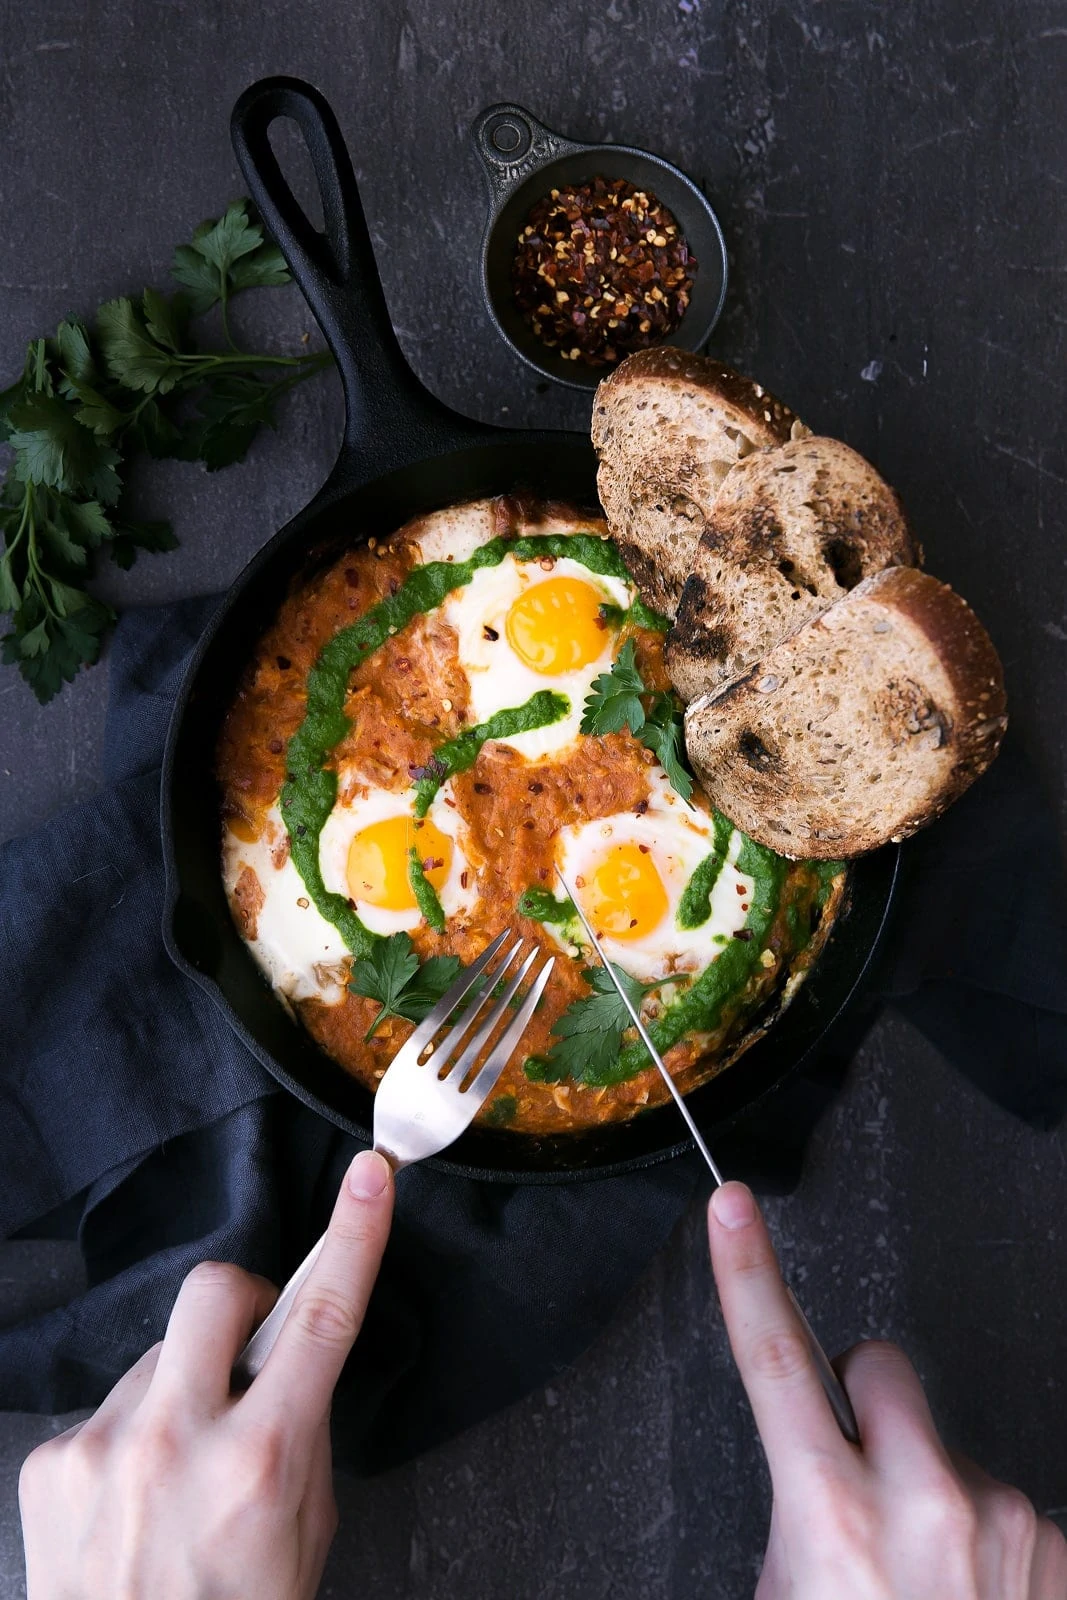 Say hello to shakshuka for breakfast: perfectly poached eggs in a spiced tomato sauce!